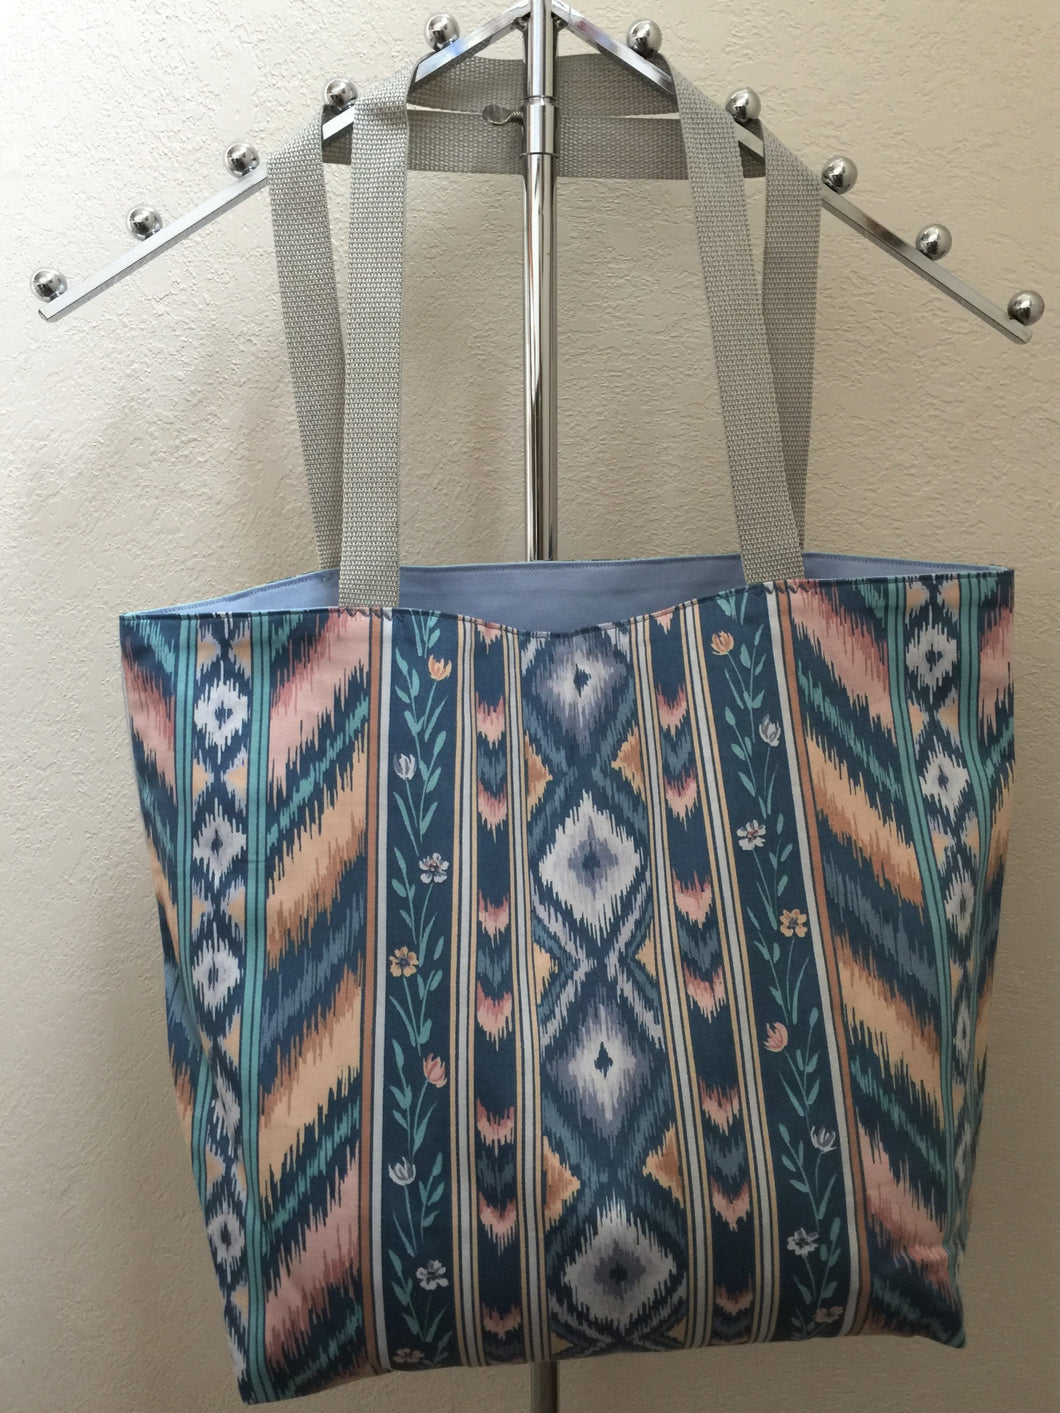 Southwestern Pattern – Stripes with Diamonds and Flowers in Blue and Peach